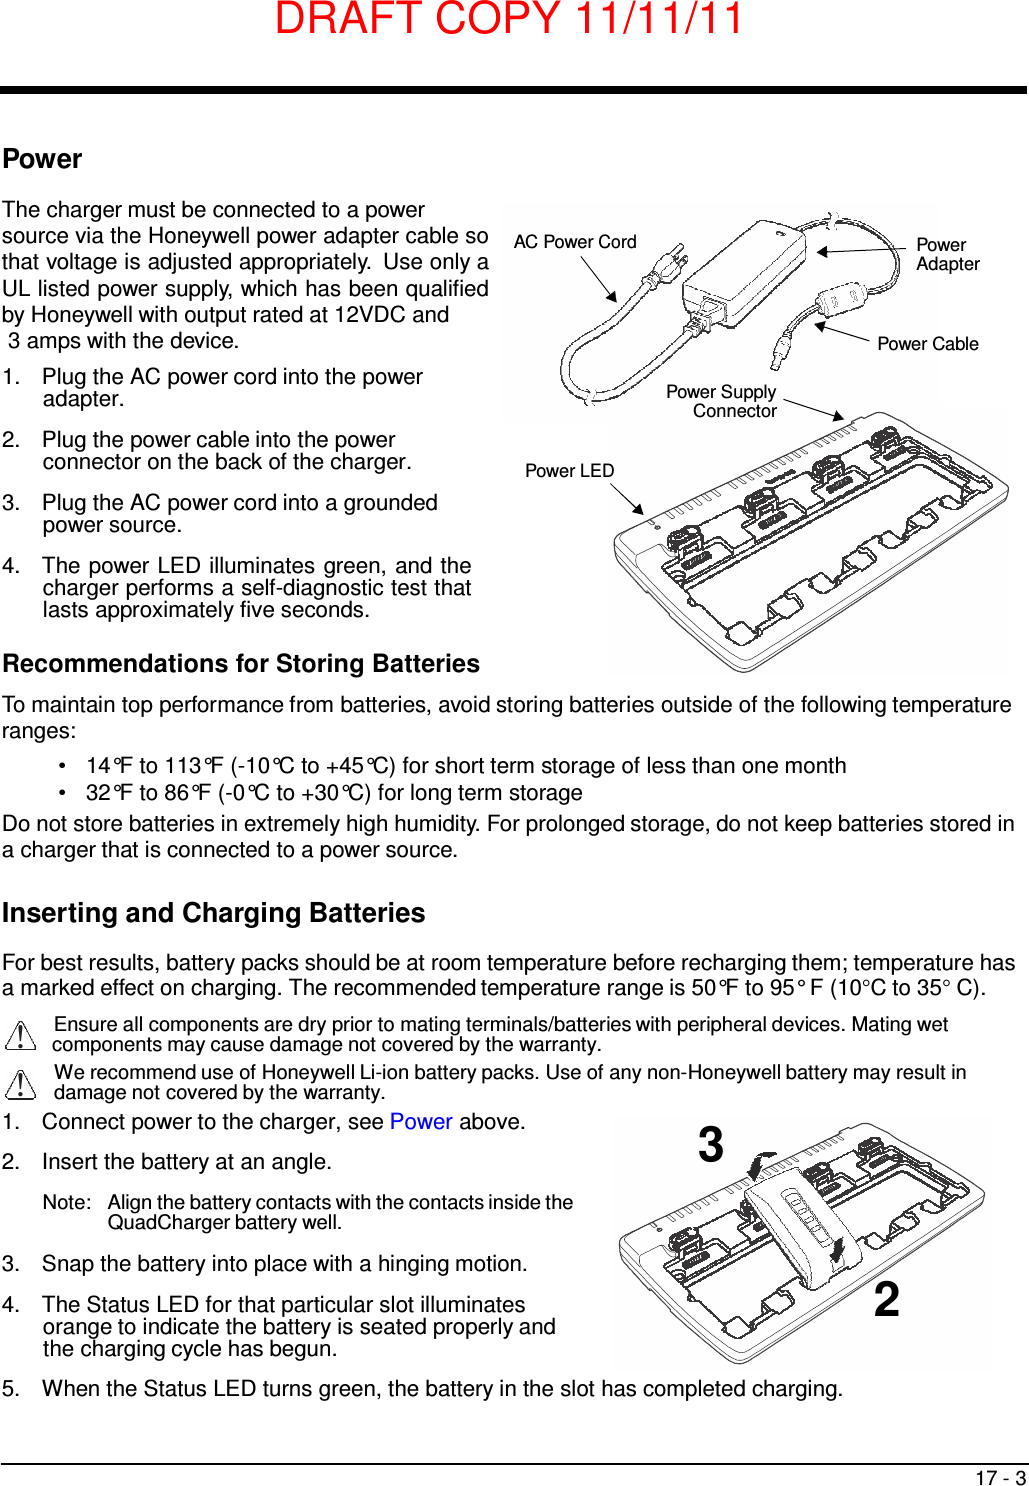 DRAFT COPY 11/11/11 17 - 3       3   Power  The charger must be connected to a power source via the Honeywell power adapter cable so that voltage is adjusted appropriately.  Use only a UL listed power supply, which has been qualified by Honeywell with output rated at 12VDC and 3 amps with the device.  1.  Plug the AC power cord into the power adapter.  2.  Plug the power cable into the power connector on the back of the charger.  3.  Plug the AC power cord into a grounded power source.  4.  The power LED illuminates green, and the charger performs a self-diagnostic test that lasts approximately five seconds.   AC Power Cord           Power LED          Power Supply Connector   Power Adapter    Power Cable  Recommendations for Storing Batteries  To maintain top performance from batteries, avoid storing batteries outside of the following temperature ranges: •   14°F to 113°F (-10°C to +45°C) for short term storage of less than one month •   32°F to 86°F (-0°C to +30°C) for long term storage Do not store batteries in extremely high humidity. For prolonged storage, do not keep batteries stored in a charger that is connected to a power source.   Inserting and Charging Batteries  For best results, battery packs should be at room temperature before recharging them; temperature has a marked effect on charging. The recommended temperature range is 50°F to 95° F (10°C to 35° C). Ensure all components are dry prior to mating terminals/batteries with peripheral devices. Mating wet components may cause damage not covered by the warranty. We recommend use of Honeywell Li-ion battery packs. Use of any non-Honeywell battery may result in damage not covered by the warranty. 1.  Connect power to the charger, see Power above.  2.  Insert the battery at an angle.  Note:   Align the battery contacts with the contacts inside the QuadCharger battery well.  3.  Snap the battery into place with a hinging motion. 4.  The Status LED for that particular slot illuminates 2 orange to indicate the battery is seated properly and the charging cycle has begun.  5.  When the Status LED turns green, the battery in the slot has completed charging. 